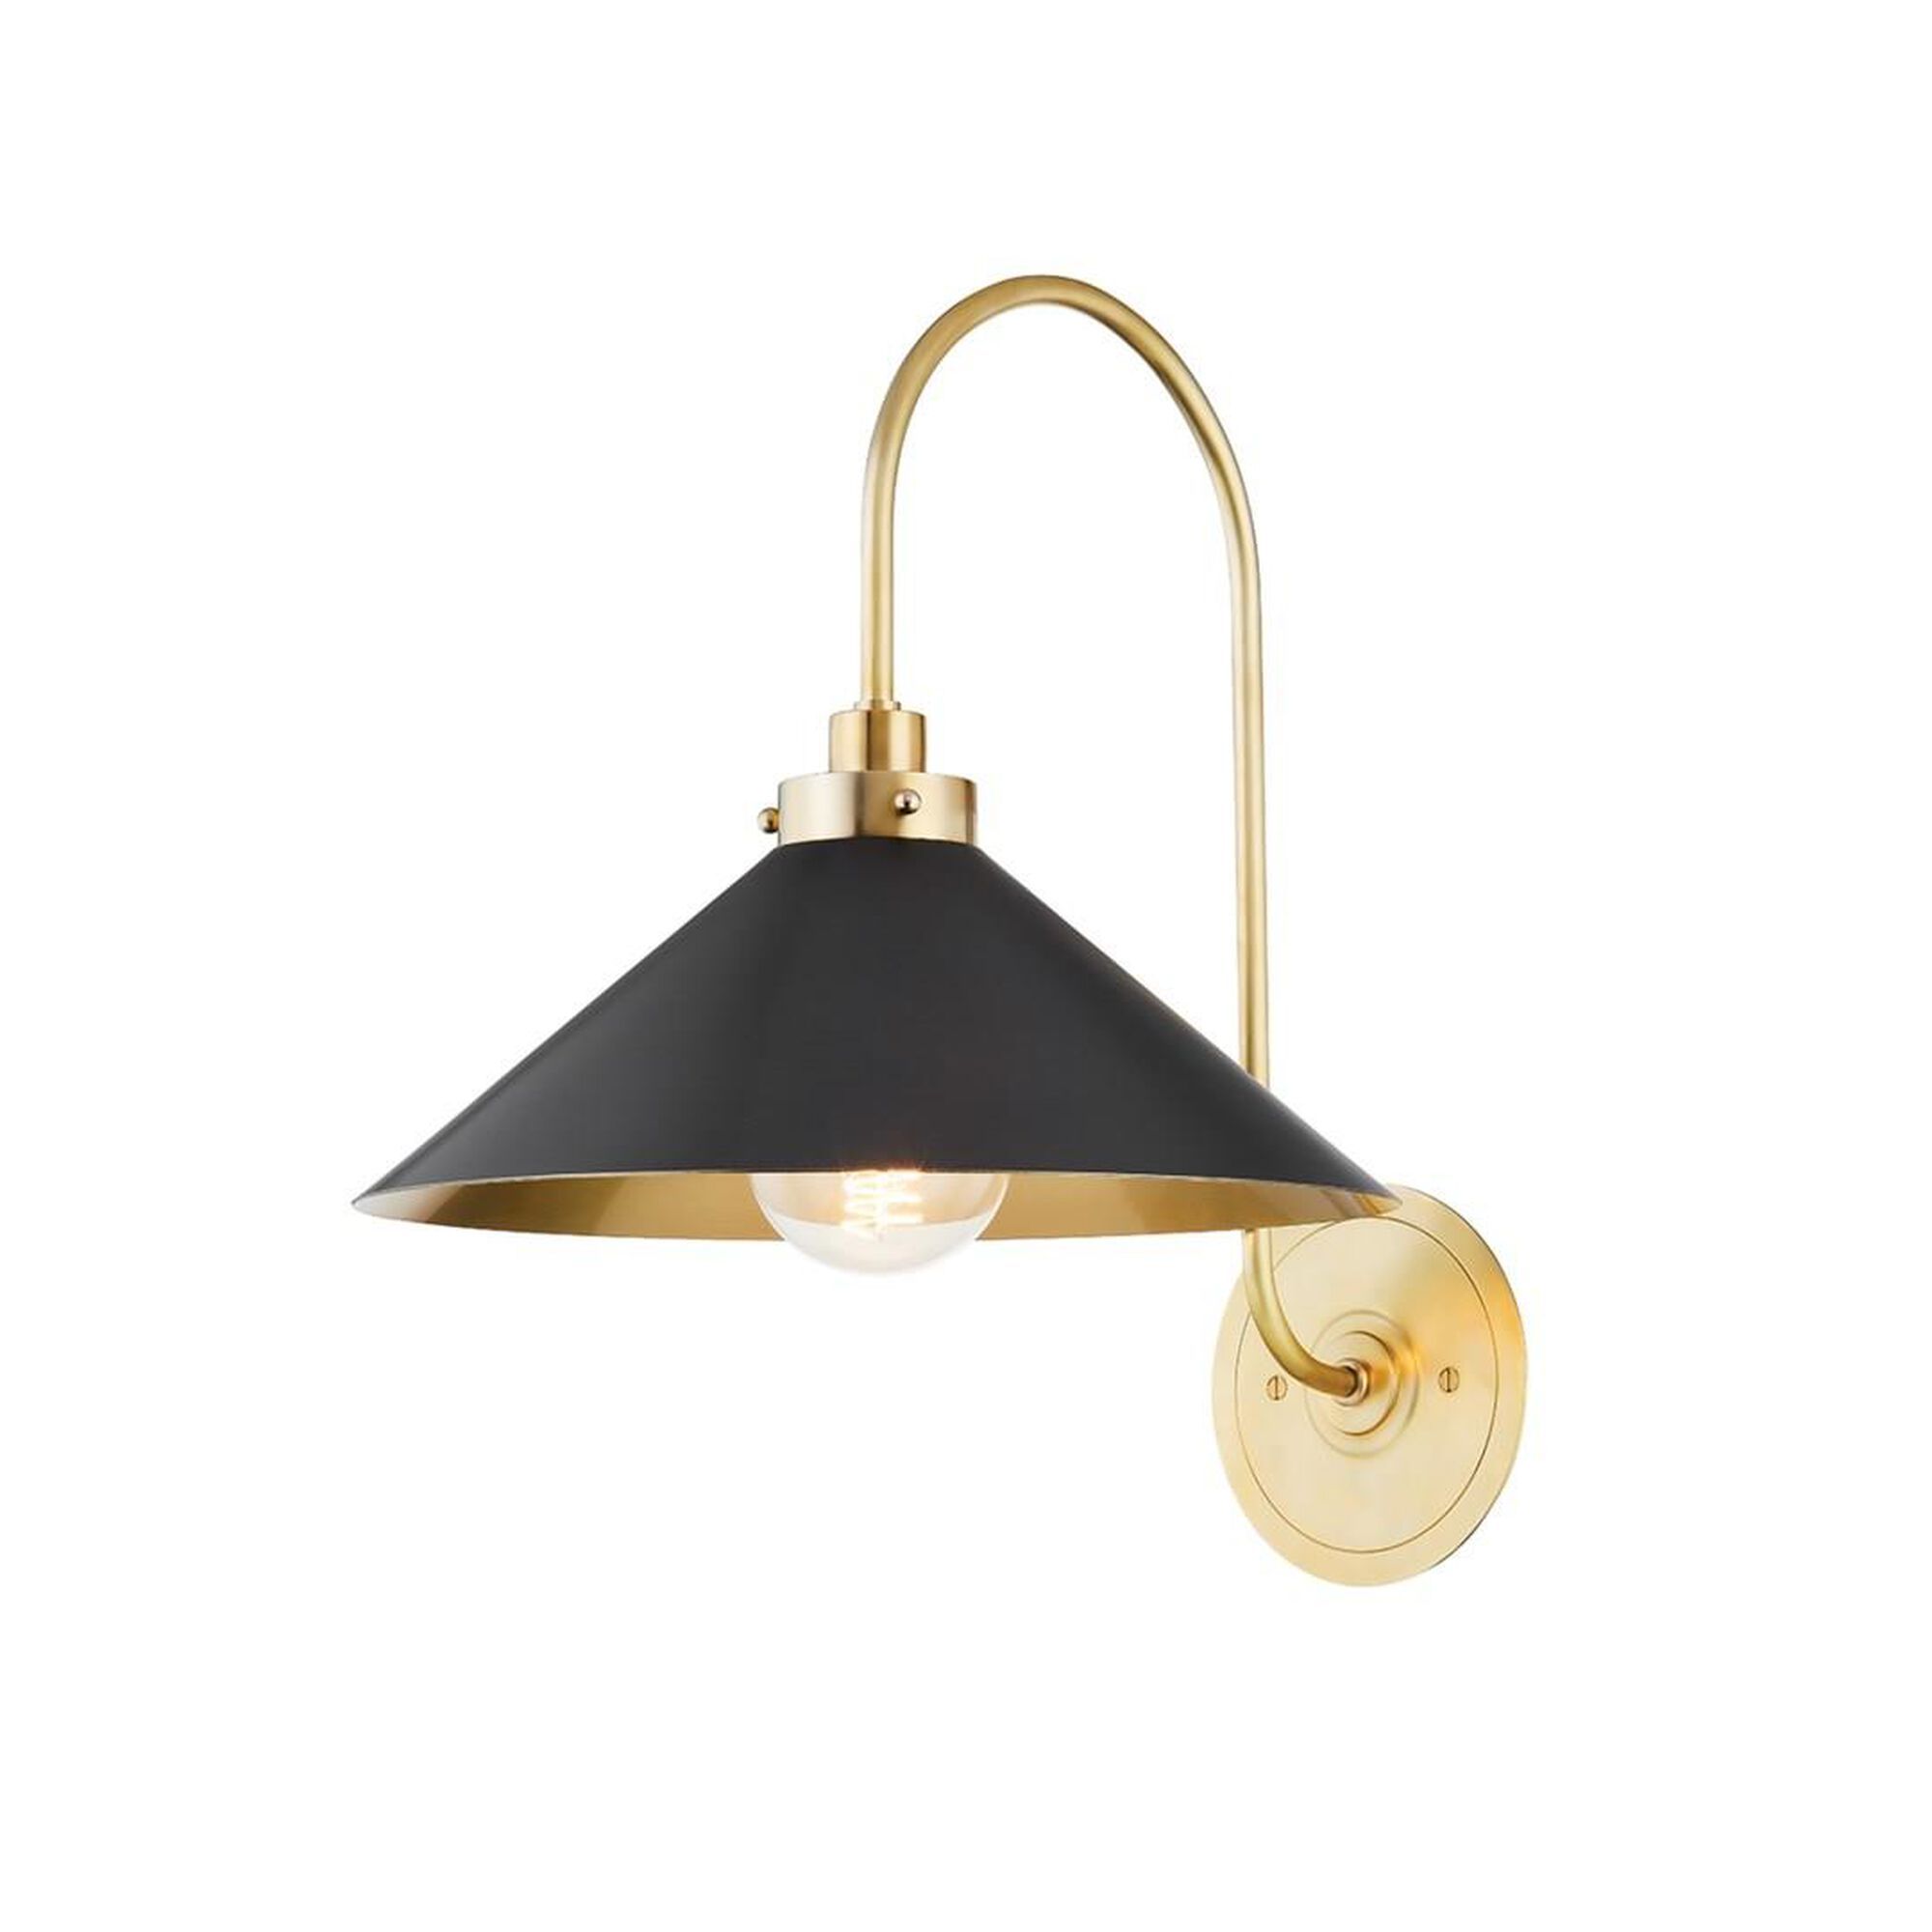 Hudson Valley Lighting Clivedon 16 Inch Wall Sconce | 1800 Lighting